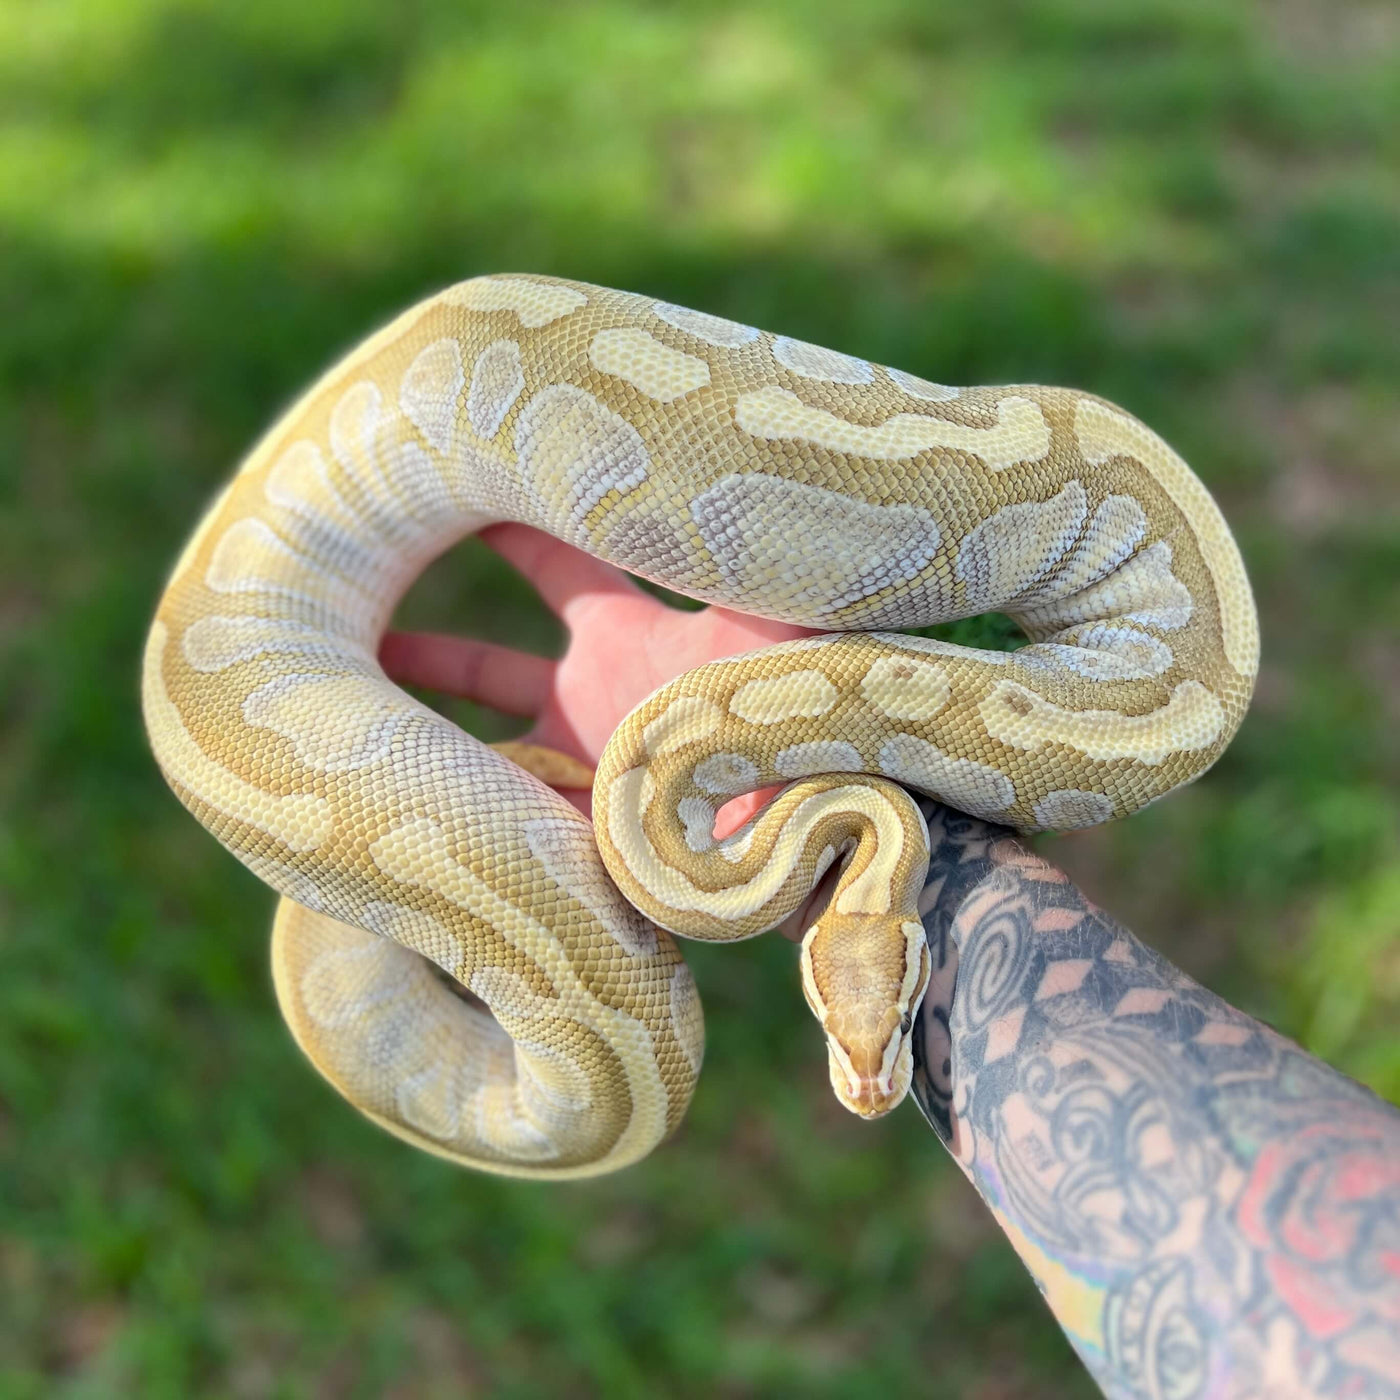 Vanilla enchi Lesser ball python for sale online, buy super fire ball pythons at cheap prices